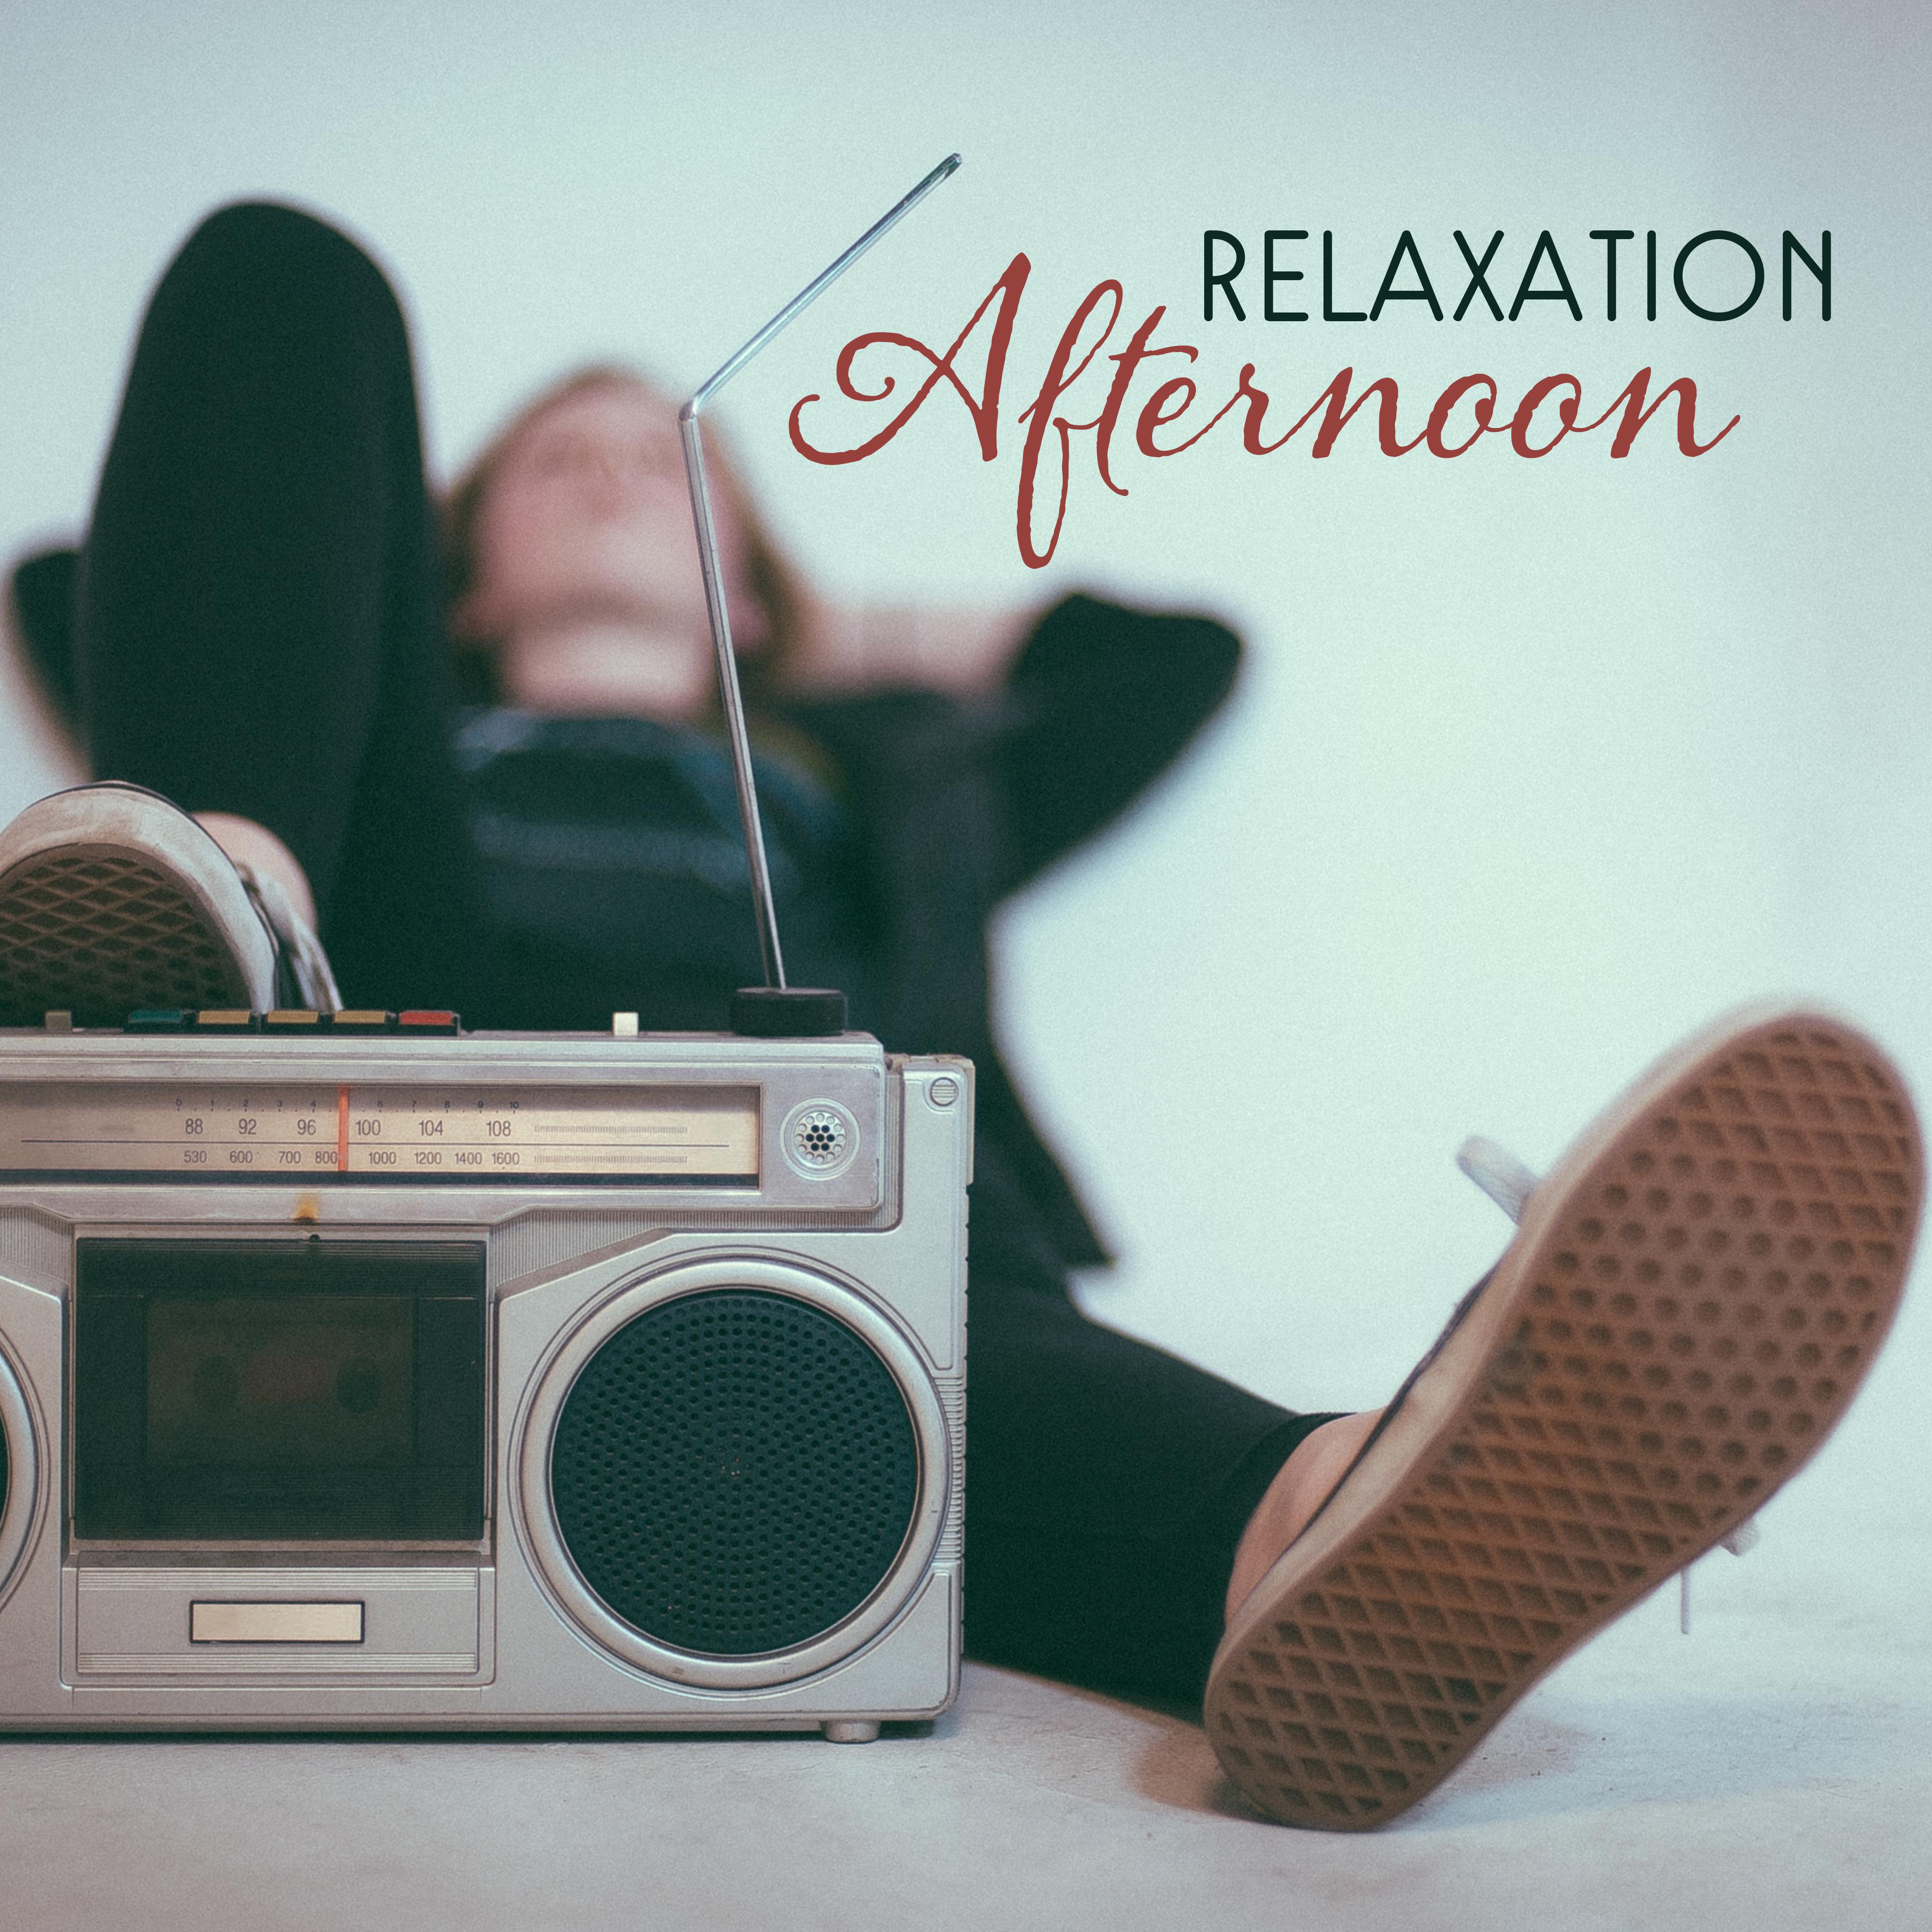 Relaxation Afternoon – Jazz for Restaurant, Cafe Music, Instrumental Sounds to Rest, Meeting with Family, Time to Dinner, Smooth Jazz